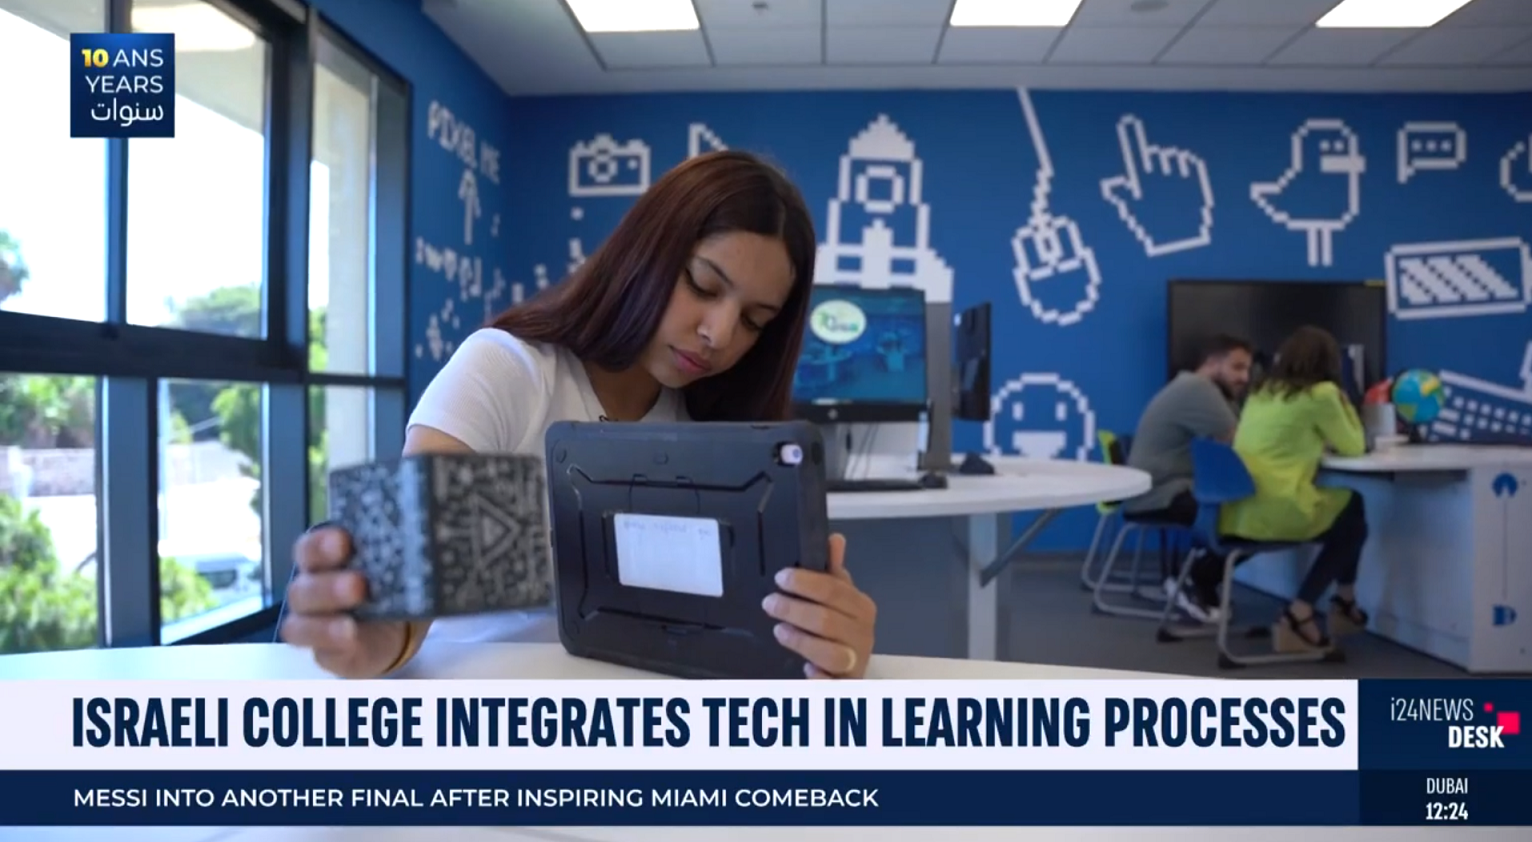 GACE is leading the innovation in education. Watch the broadcasted article in i24News